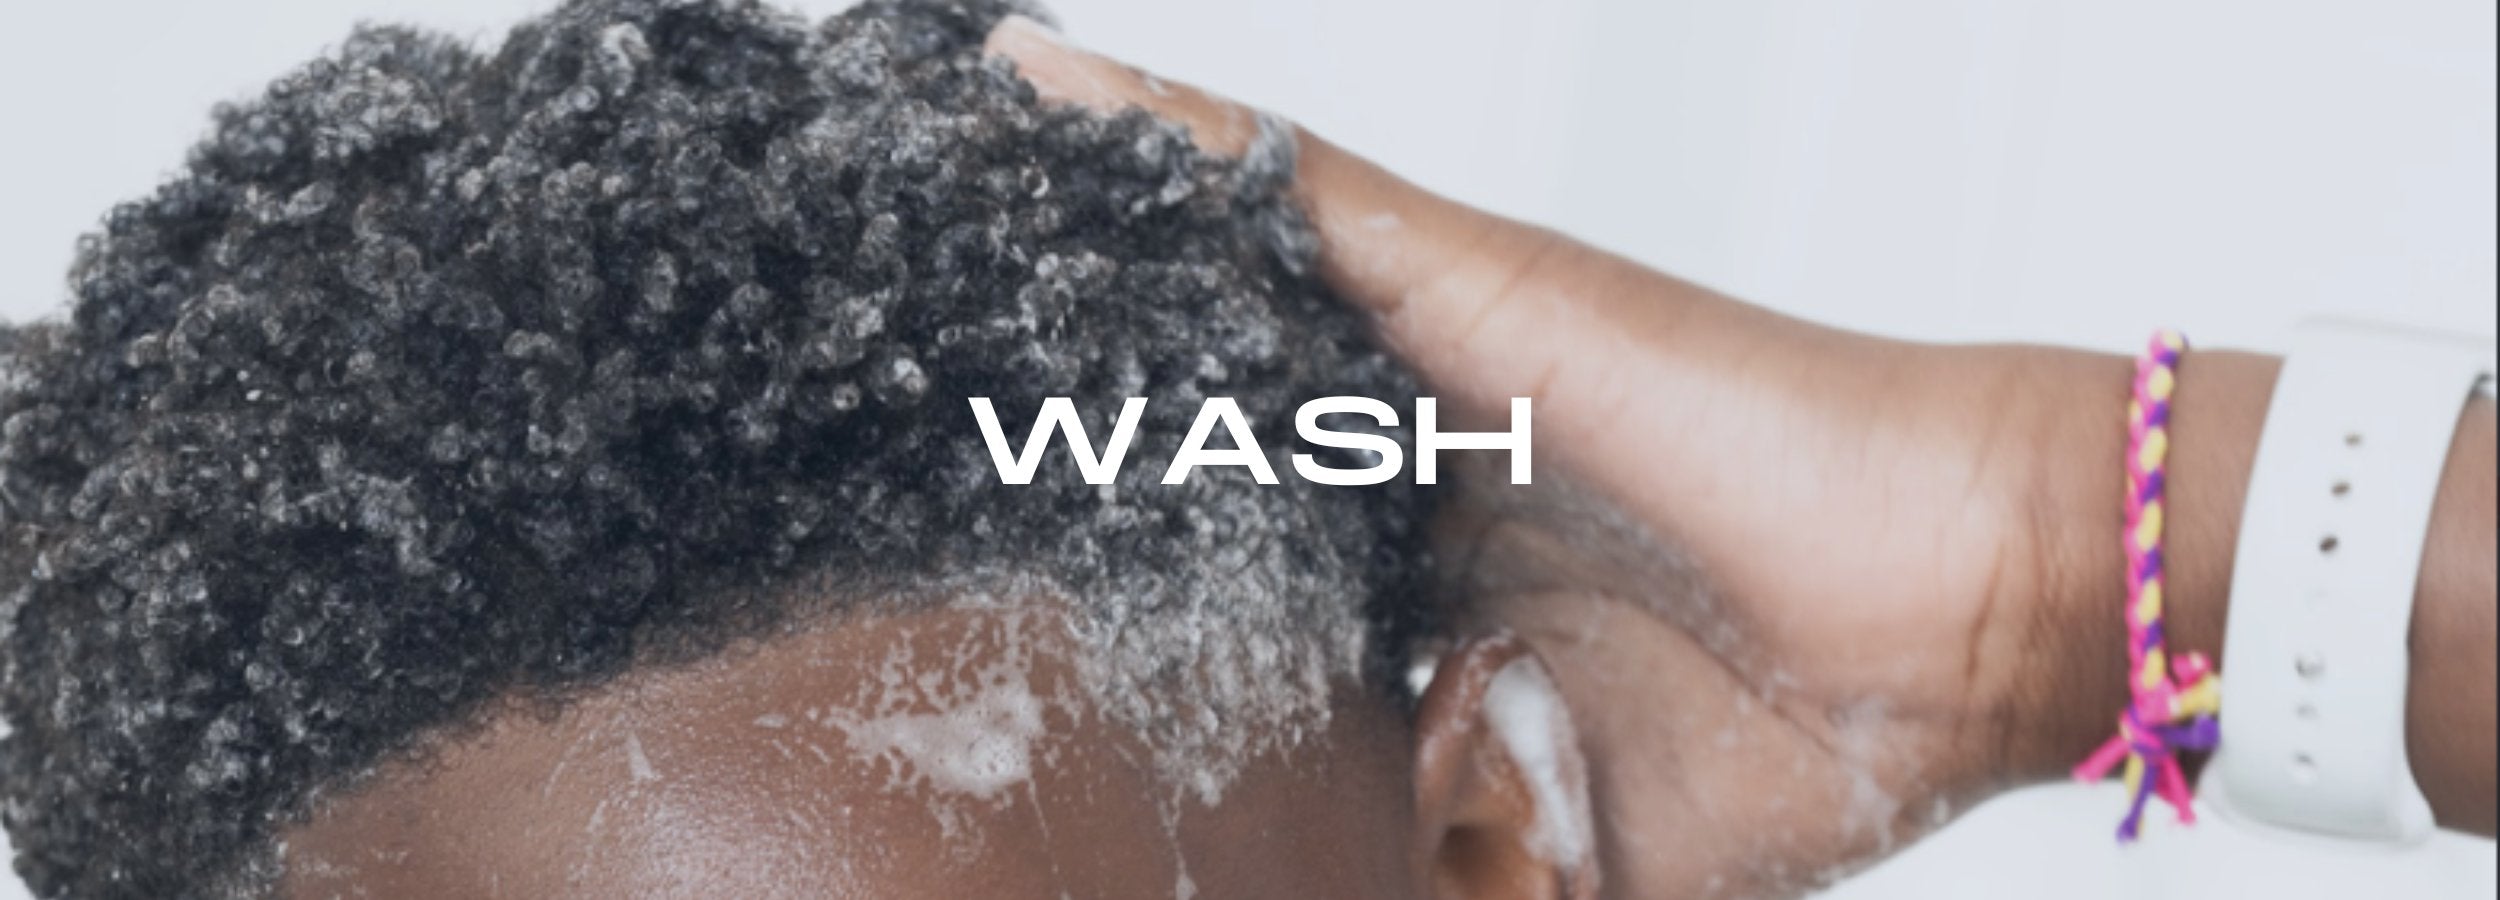 young king hair care wash products